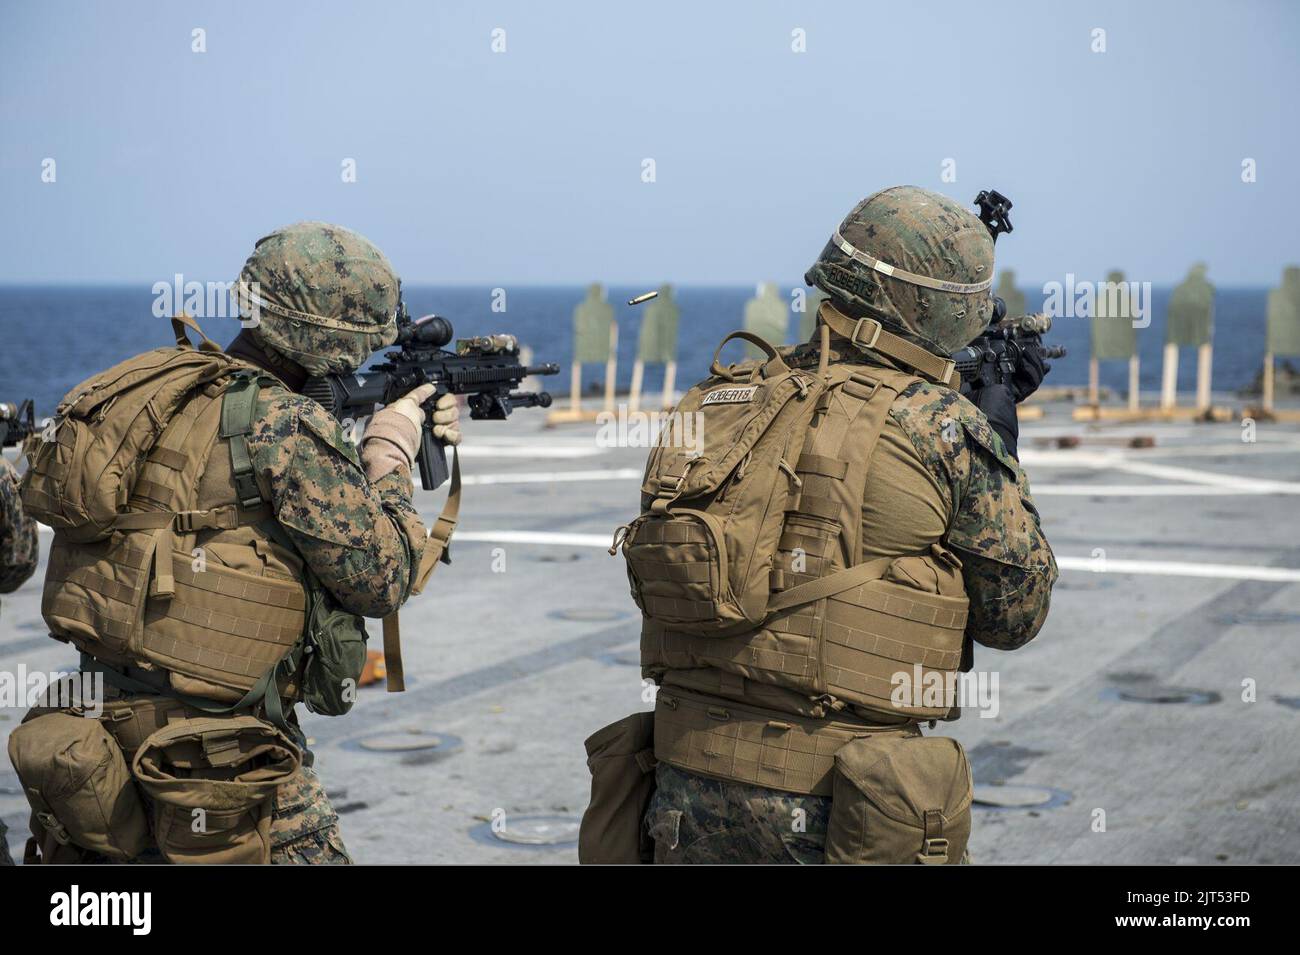 U.S. Marines assigned to Battalion Landing Team, 2nd Battalion, 5th Marine Regiment, 31st Marine Expeditionary Unit (MEU) participate in a live-fire exercise aboard the amphibious transport dock ship USS Denver 140319 Stock Photo